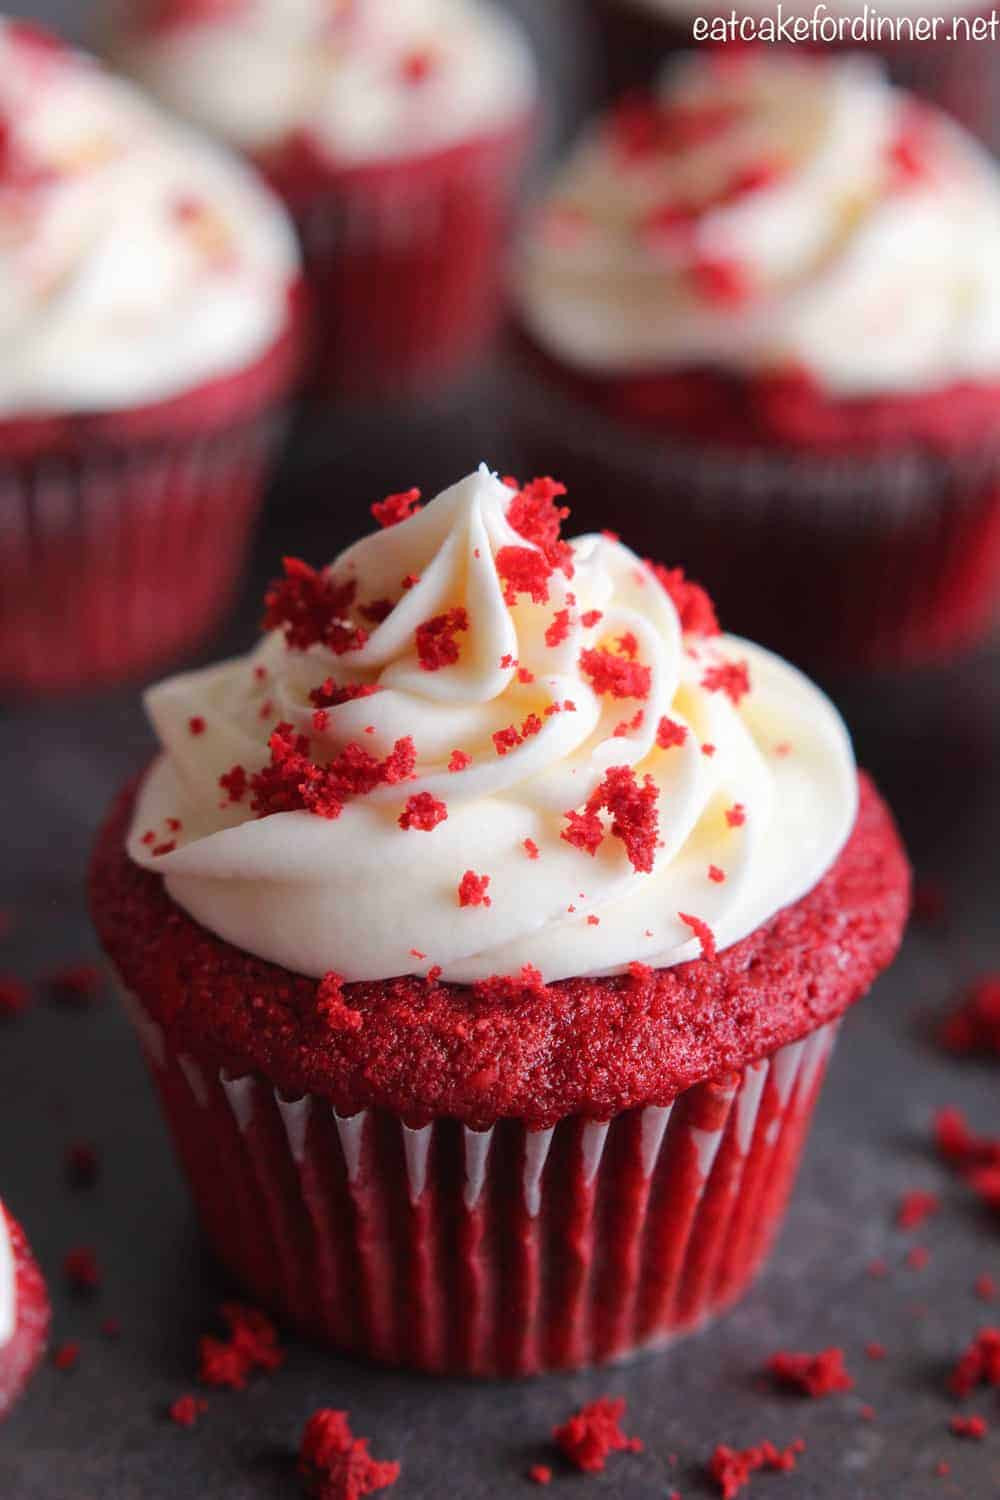 Best Cupcakes Recipe
 The BEST Red Velvet Cupcakes with Cream Cheese Frosting